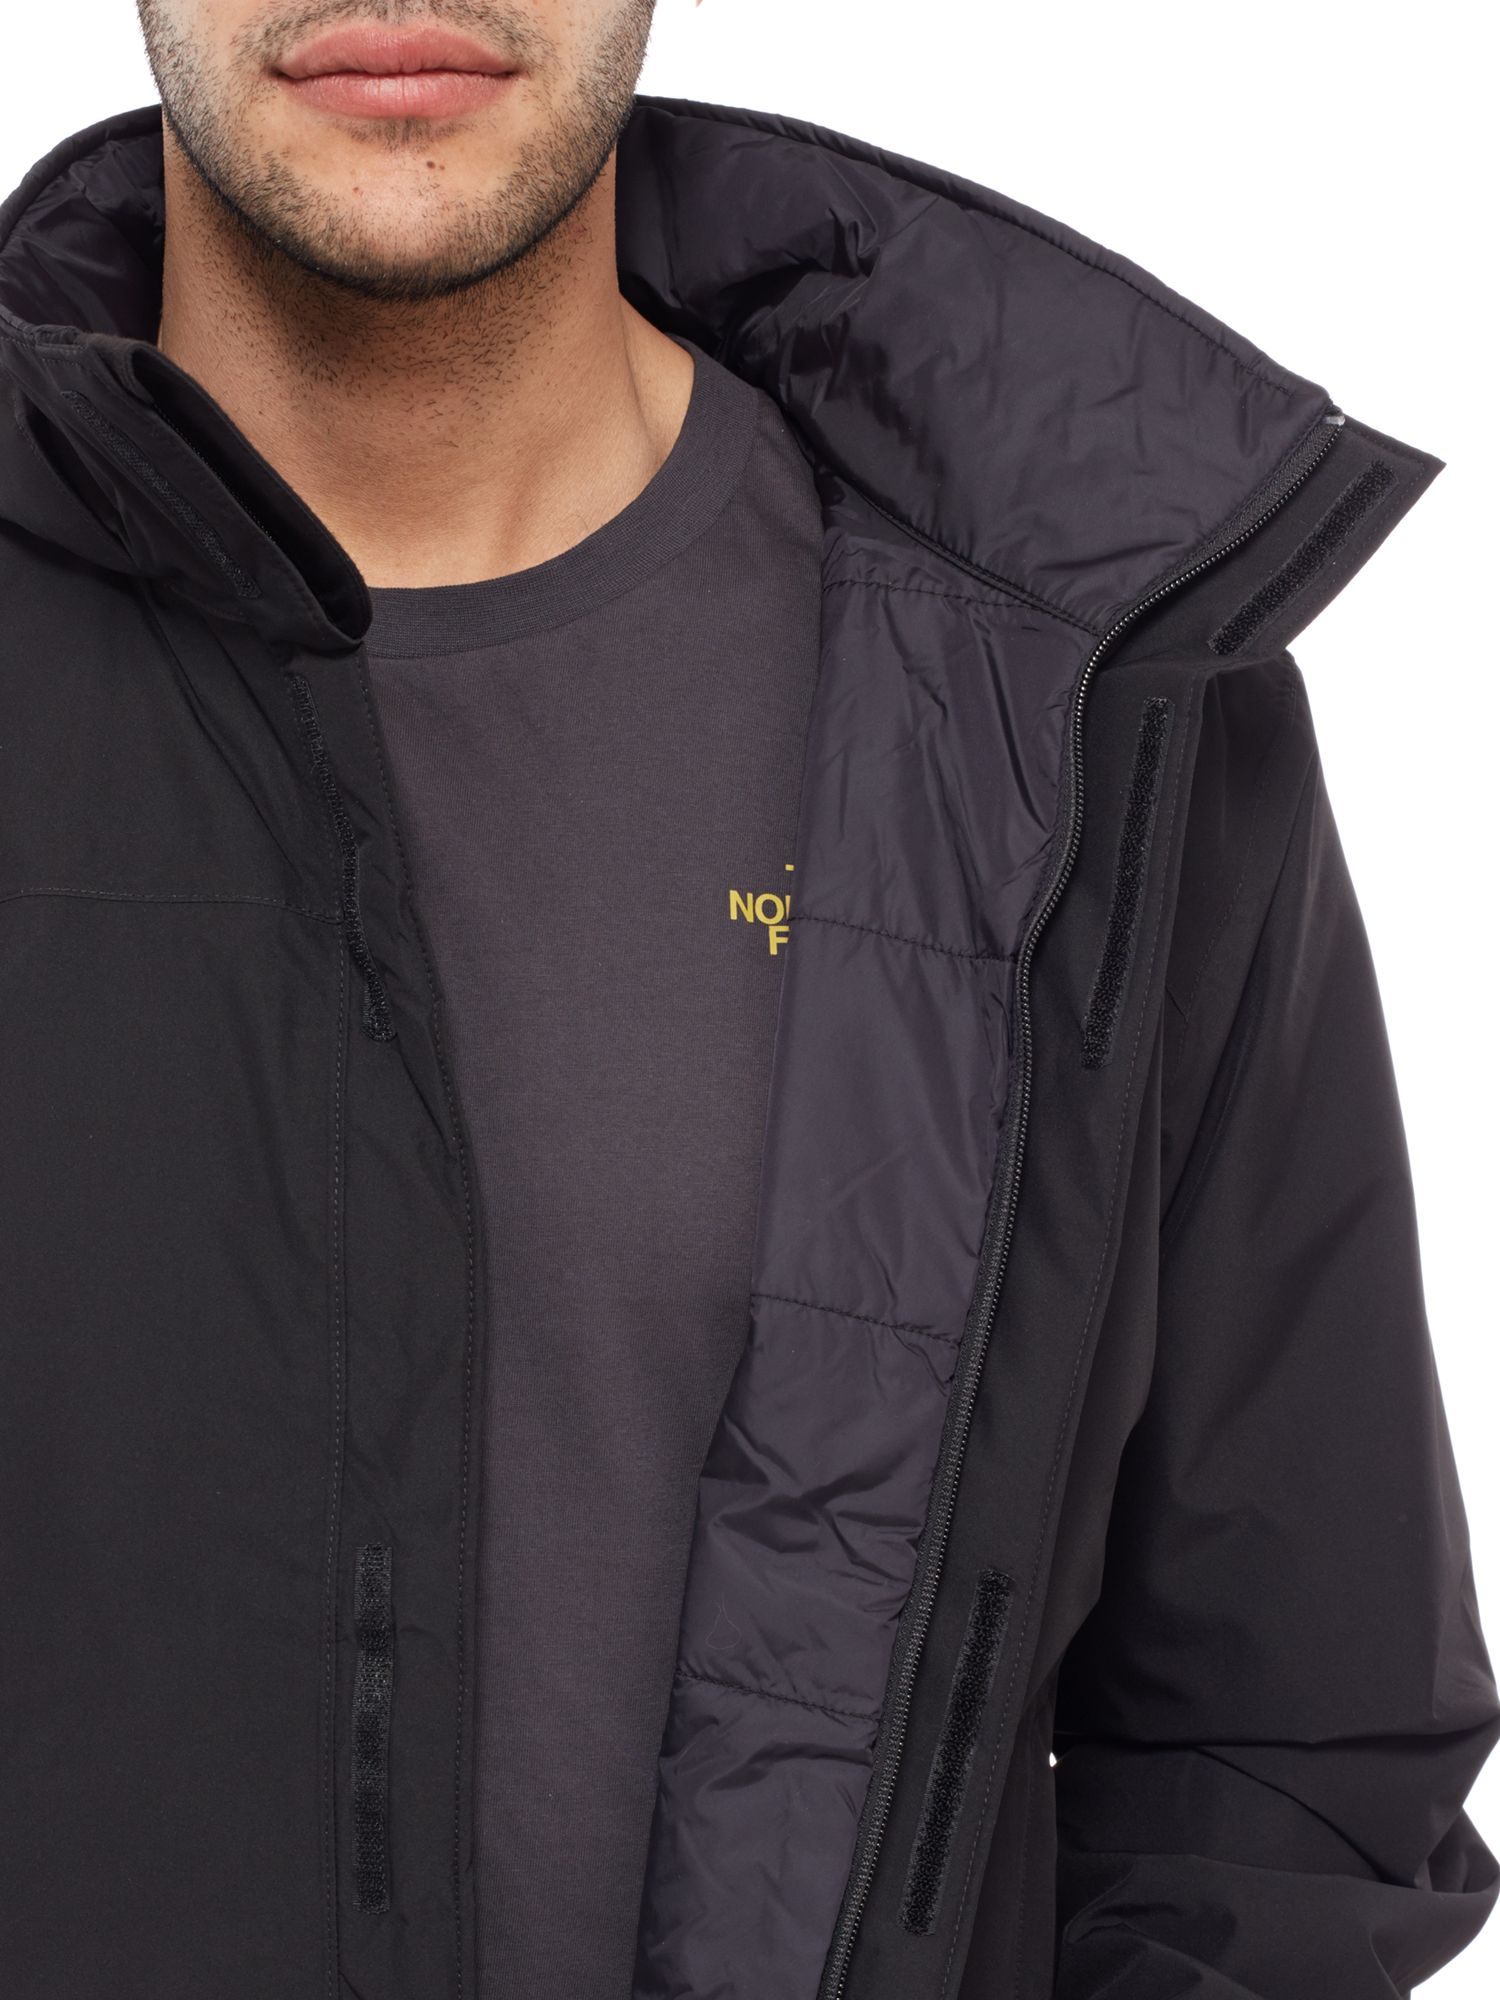 north face insulated waterproof jacket